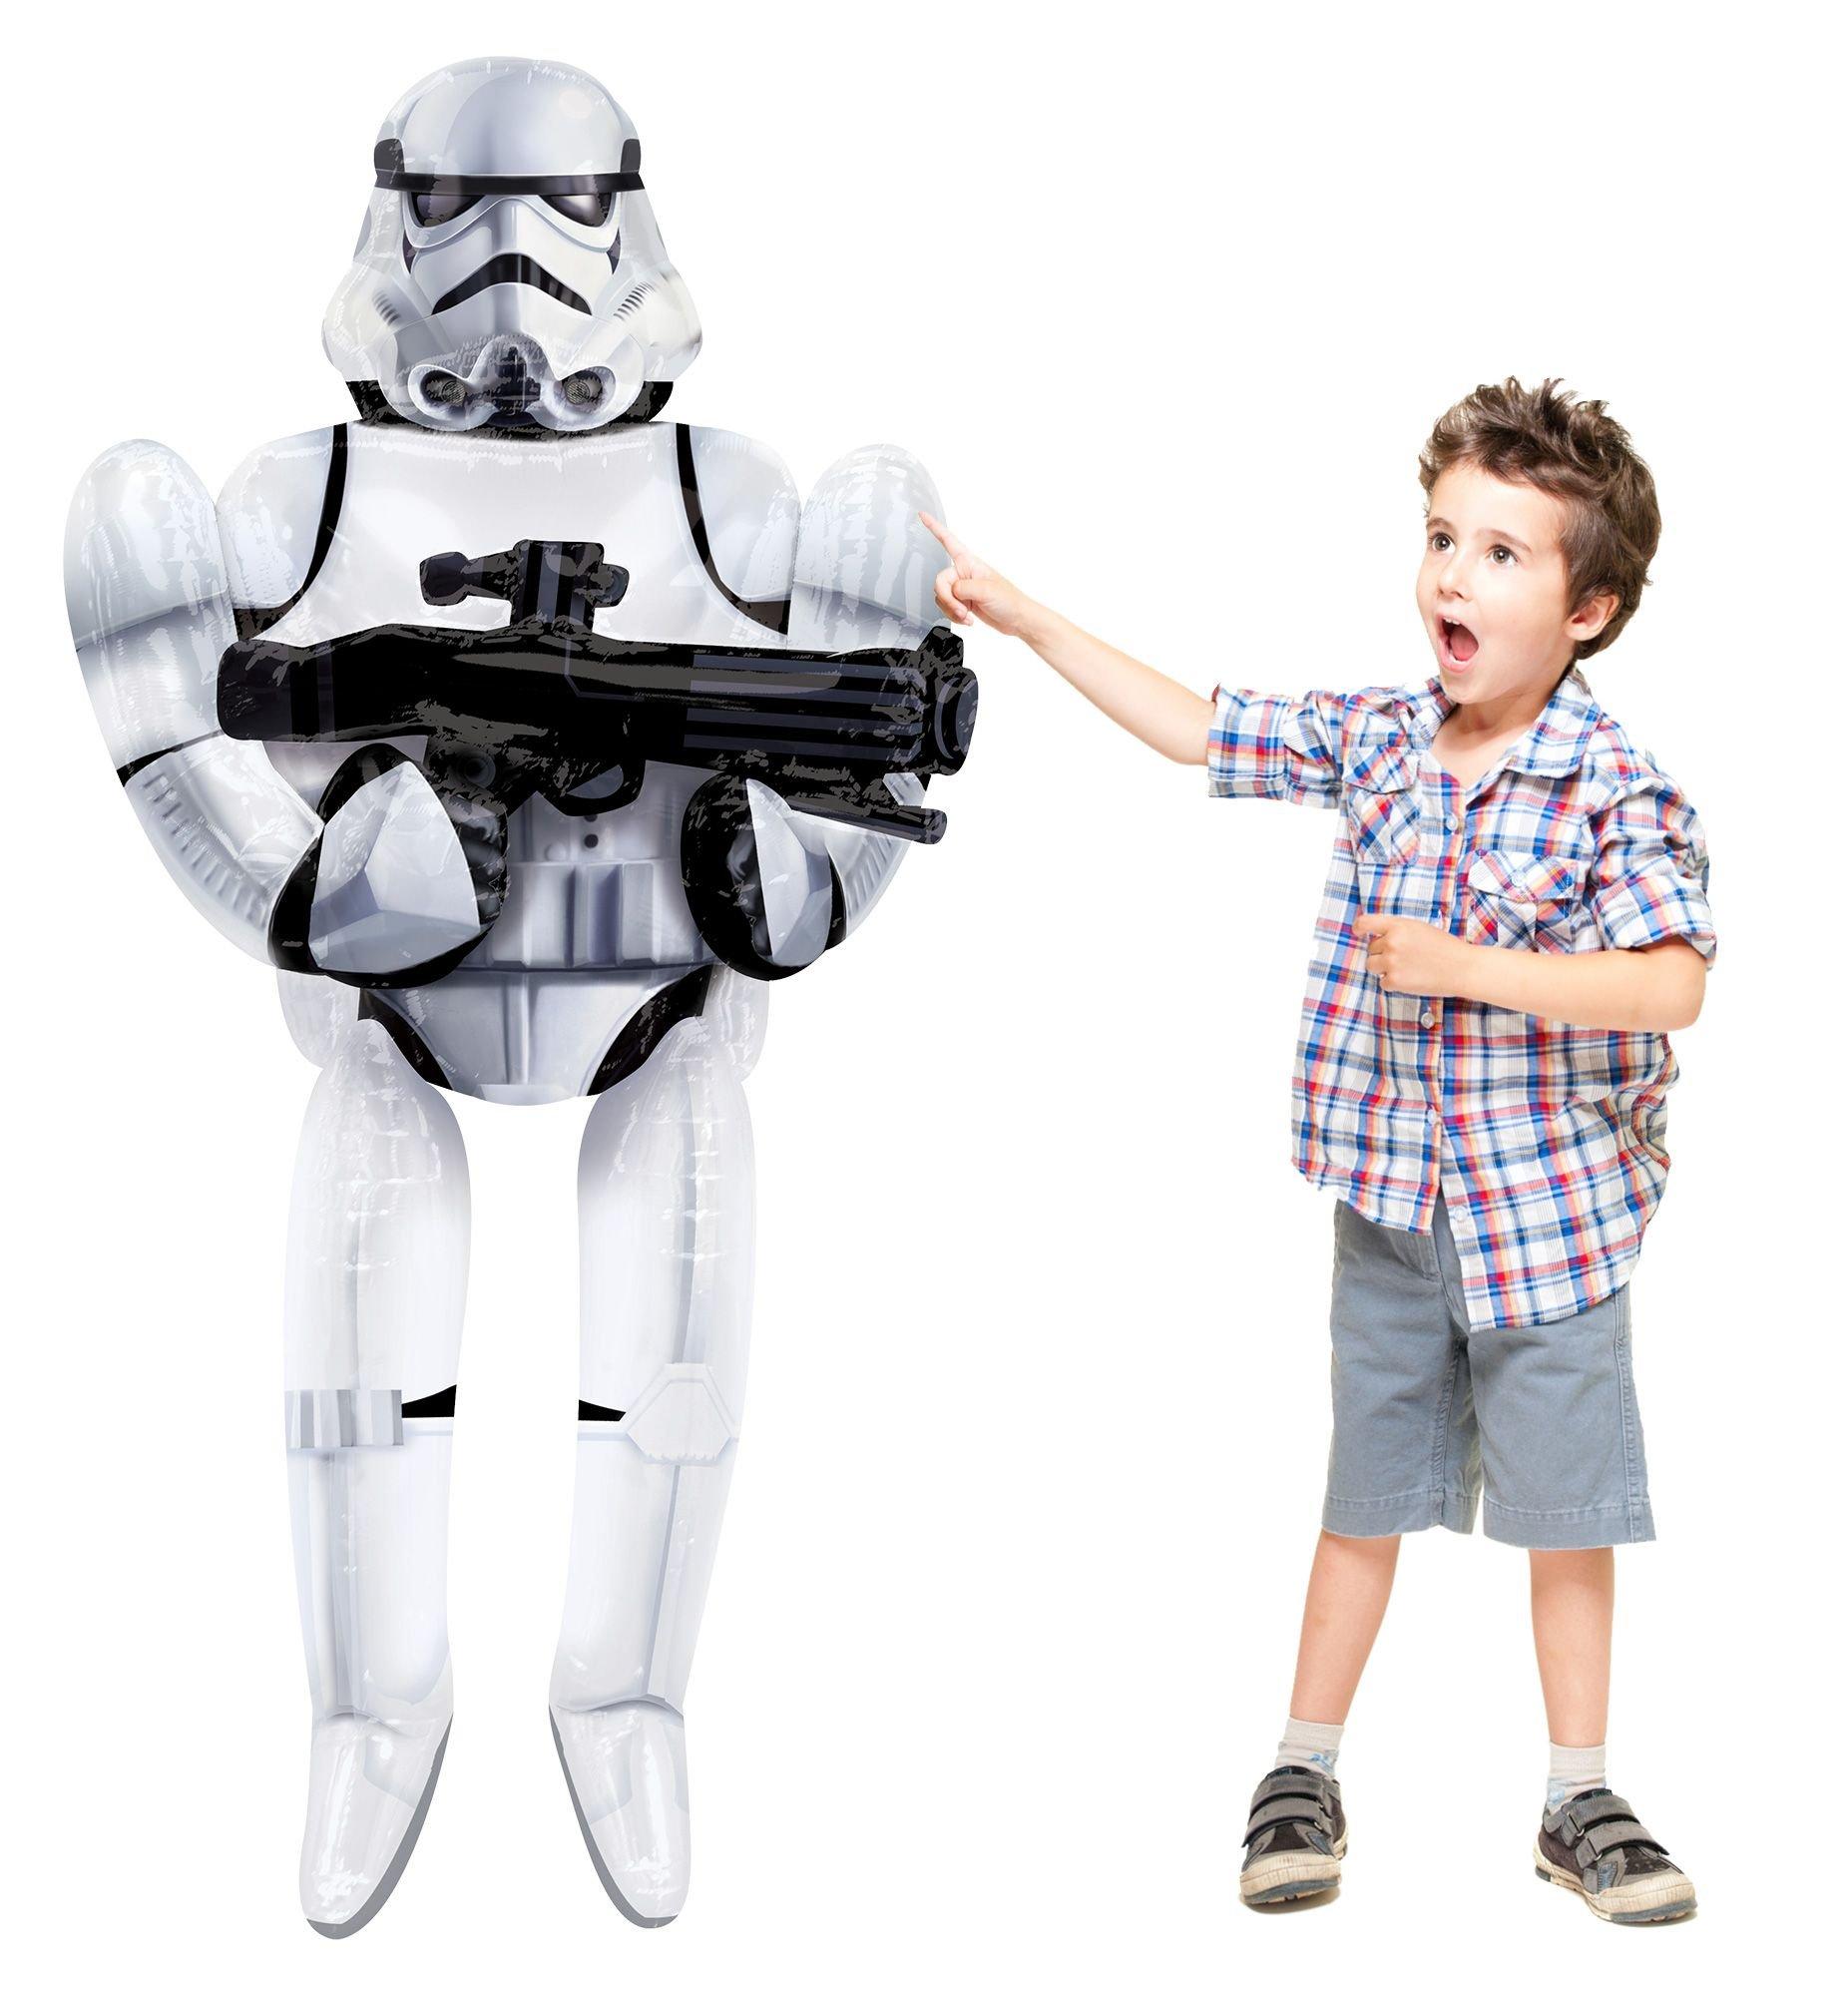 Stormtrooper Balloon - Star Wars 7 The Force Awakens Giant Gliding, 70in